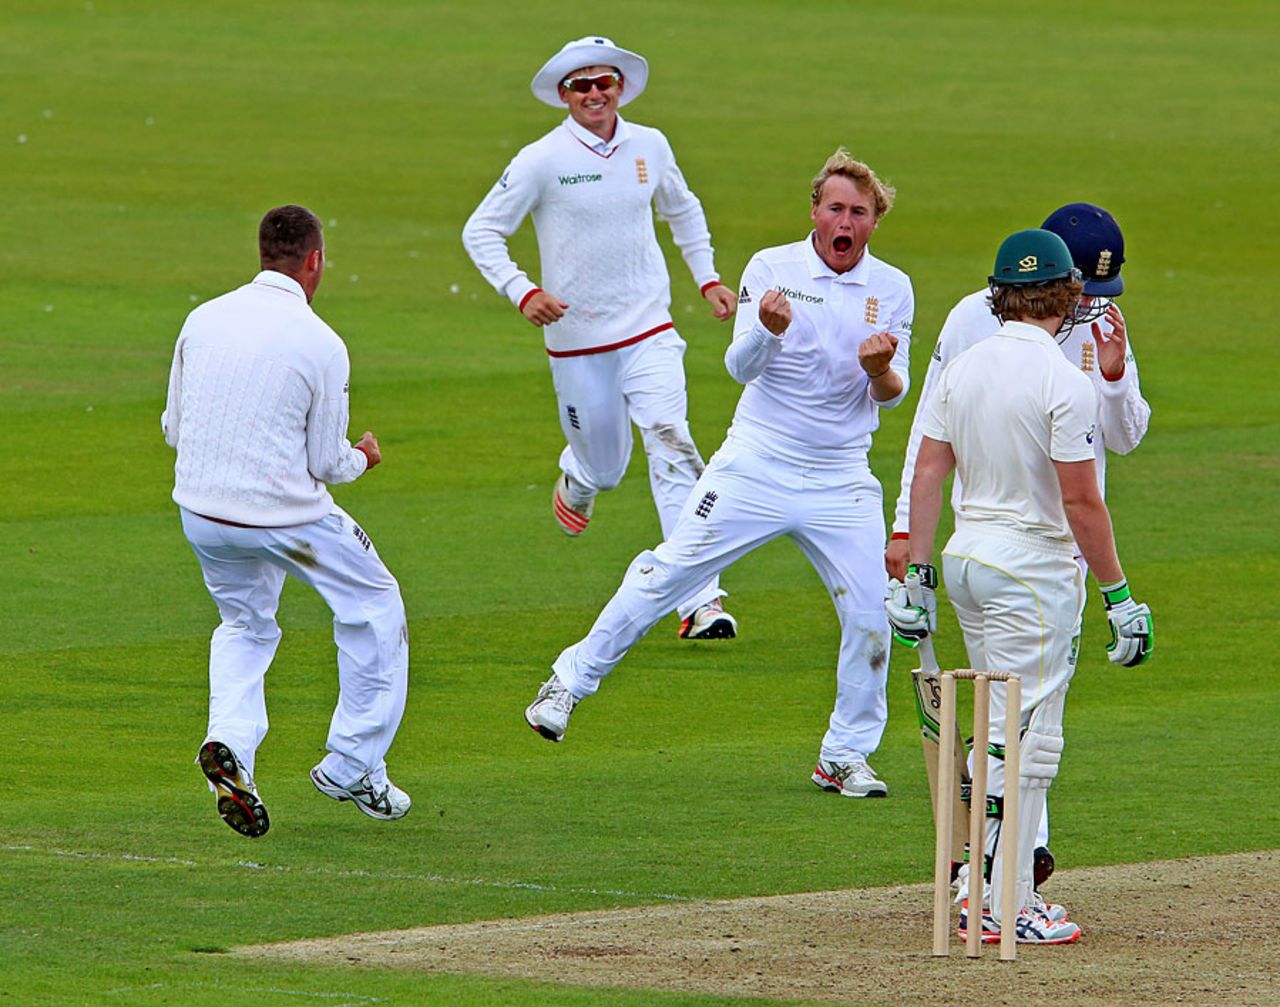 Matthew Parkinson helped England hit back with his legspin, England U-19s v Australia U-19s, Only Test, Chester-le-Street, 1st day, August 4, 2015